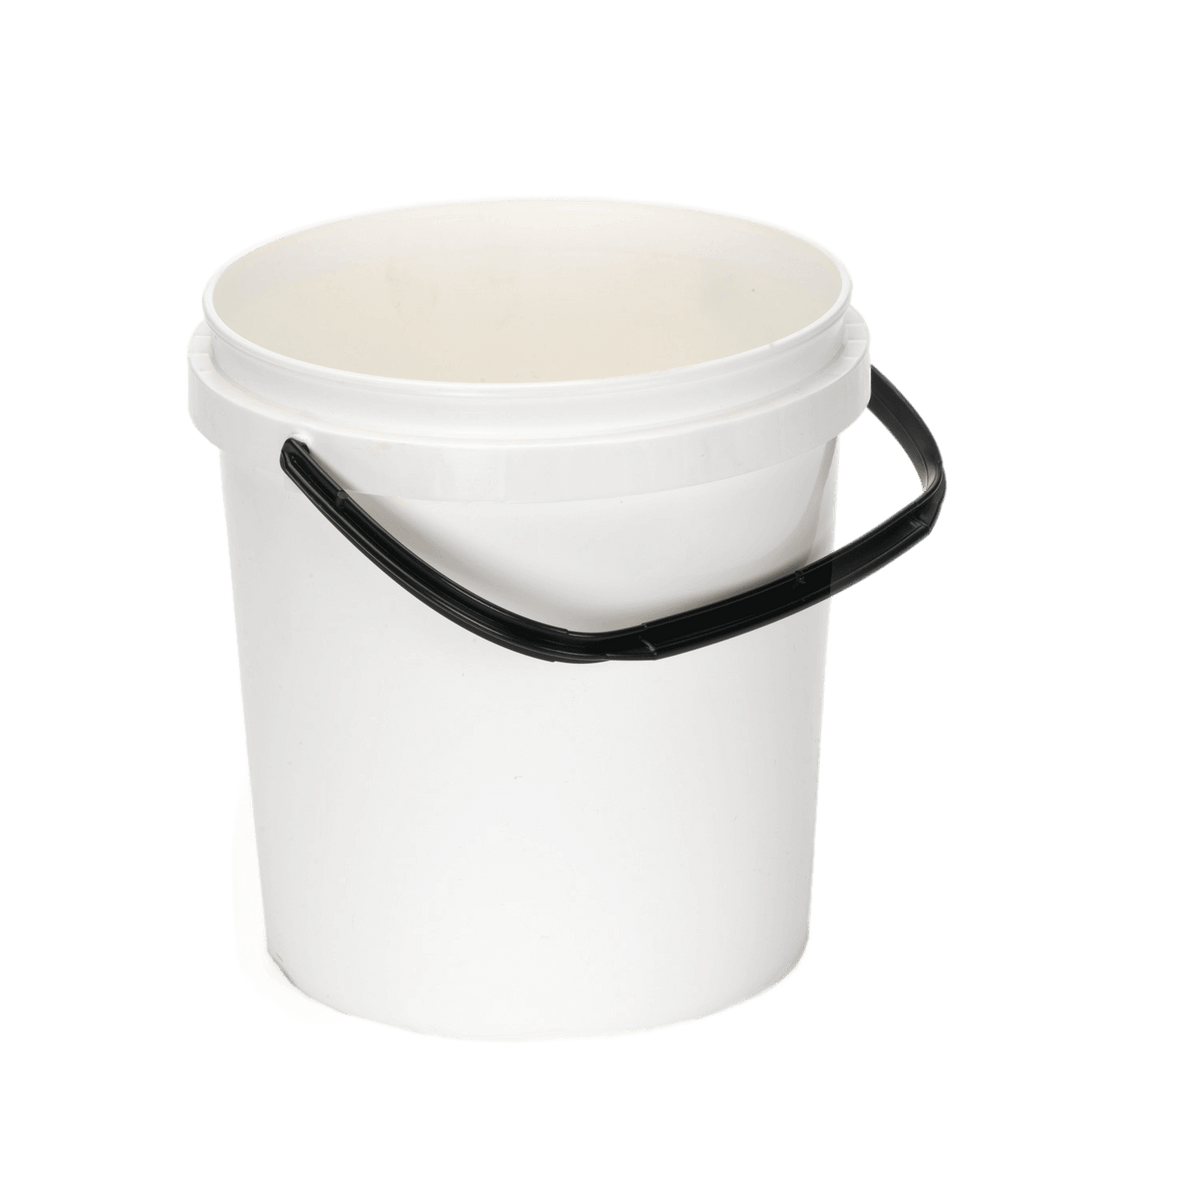  MERRYHAPY Plastic Barrel Round Plastic Tub Bucket with Lid  Plastic Bucket with Lid Small Bucket with Handle Water Container for Farm  Cleaning Buckets Household Empty Bucket Garden Bucket Keg : Health